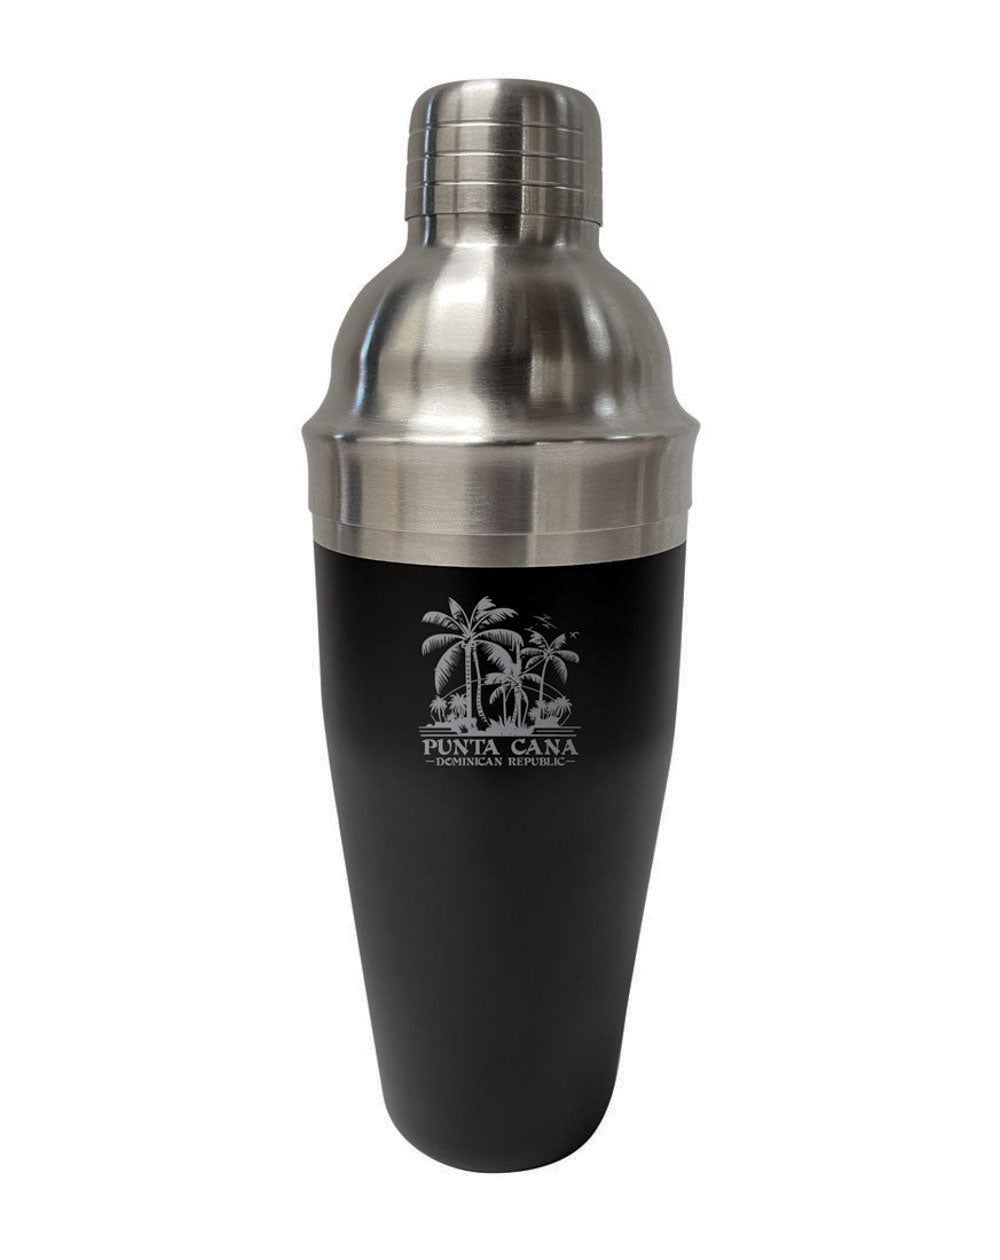 Punta Cana Dominican Republic Souvenir 24 oz Stainless Steel Cocktail Shaker